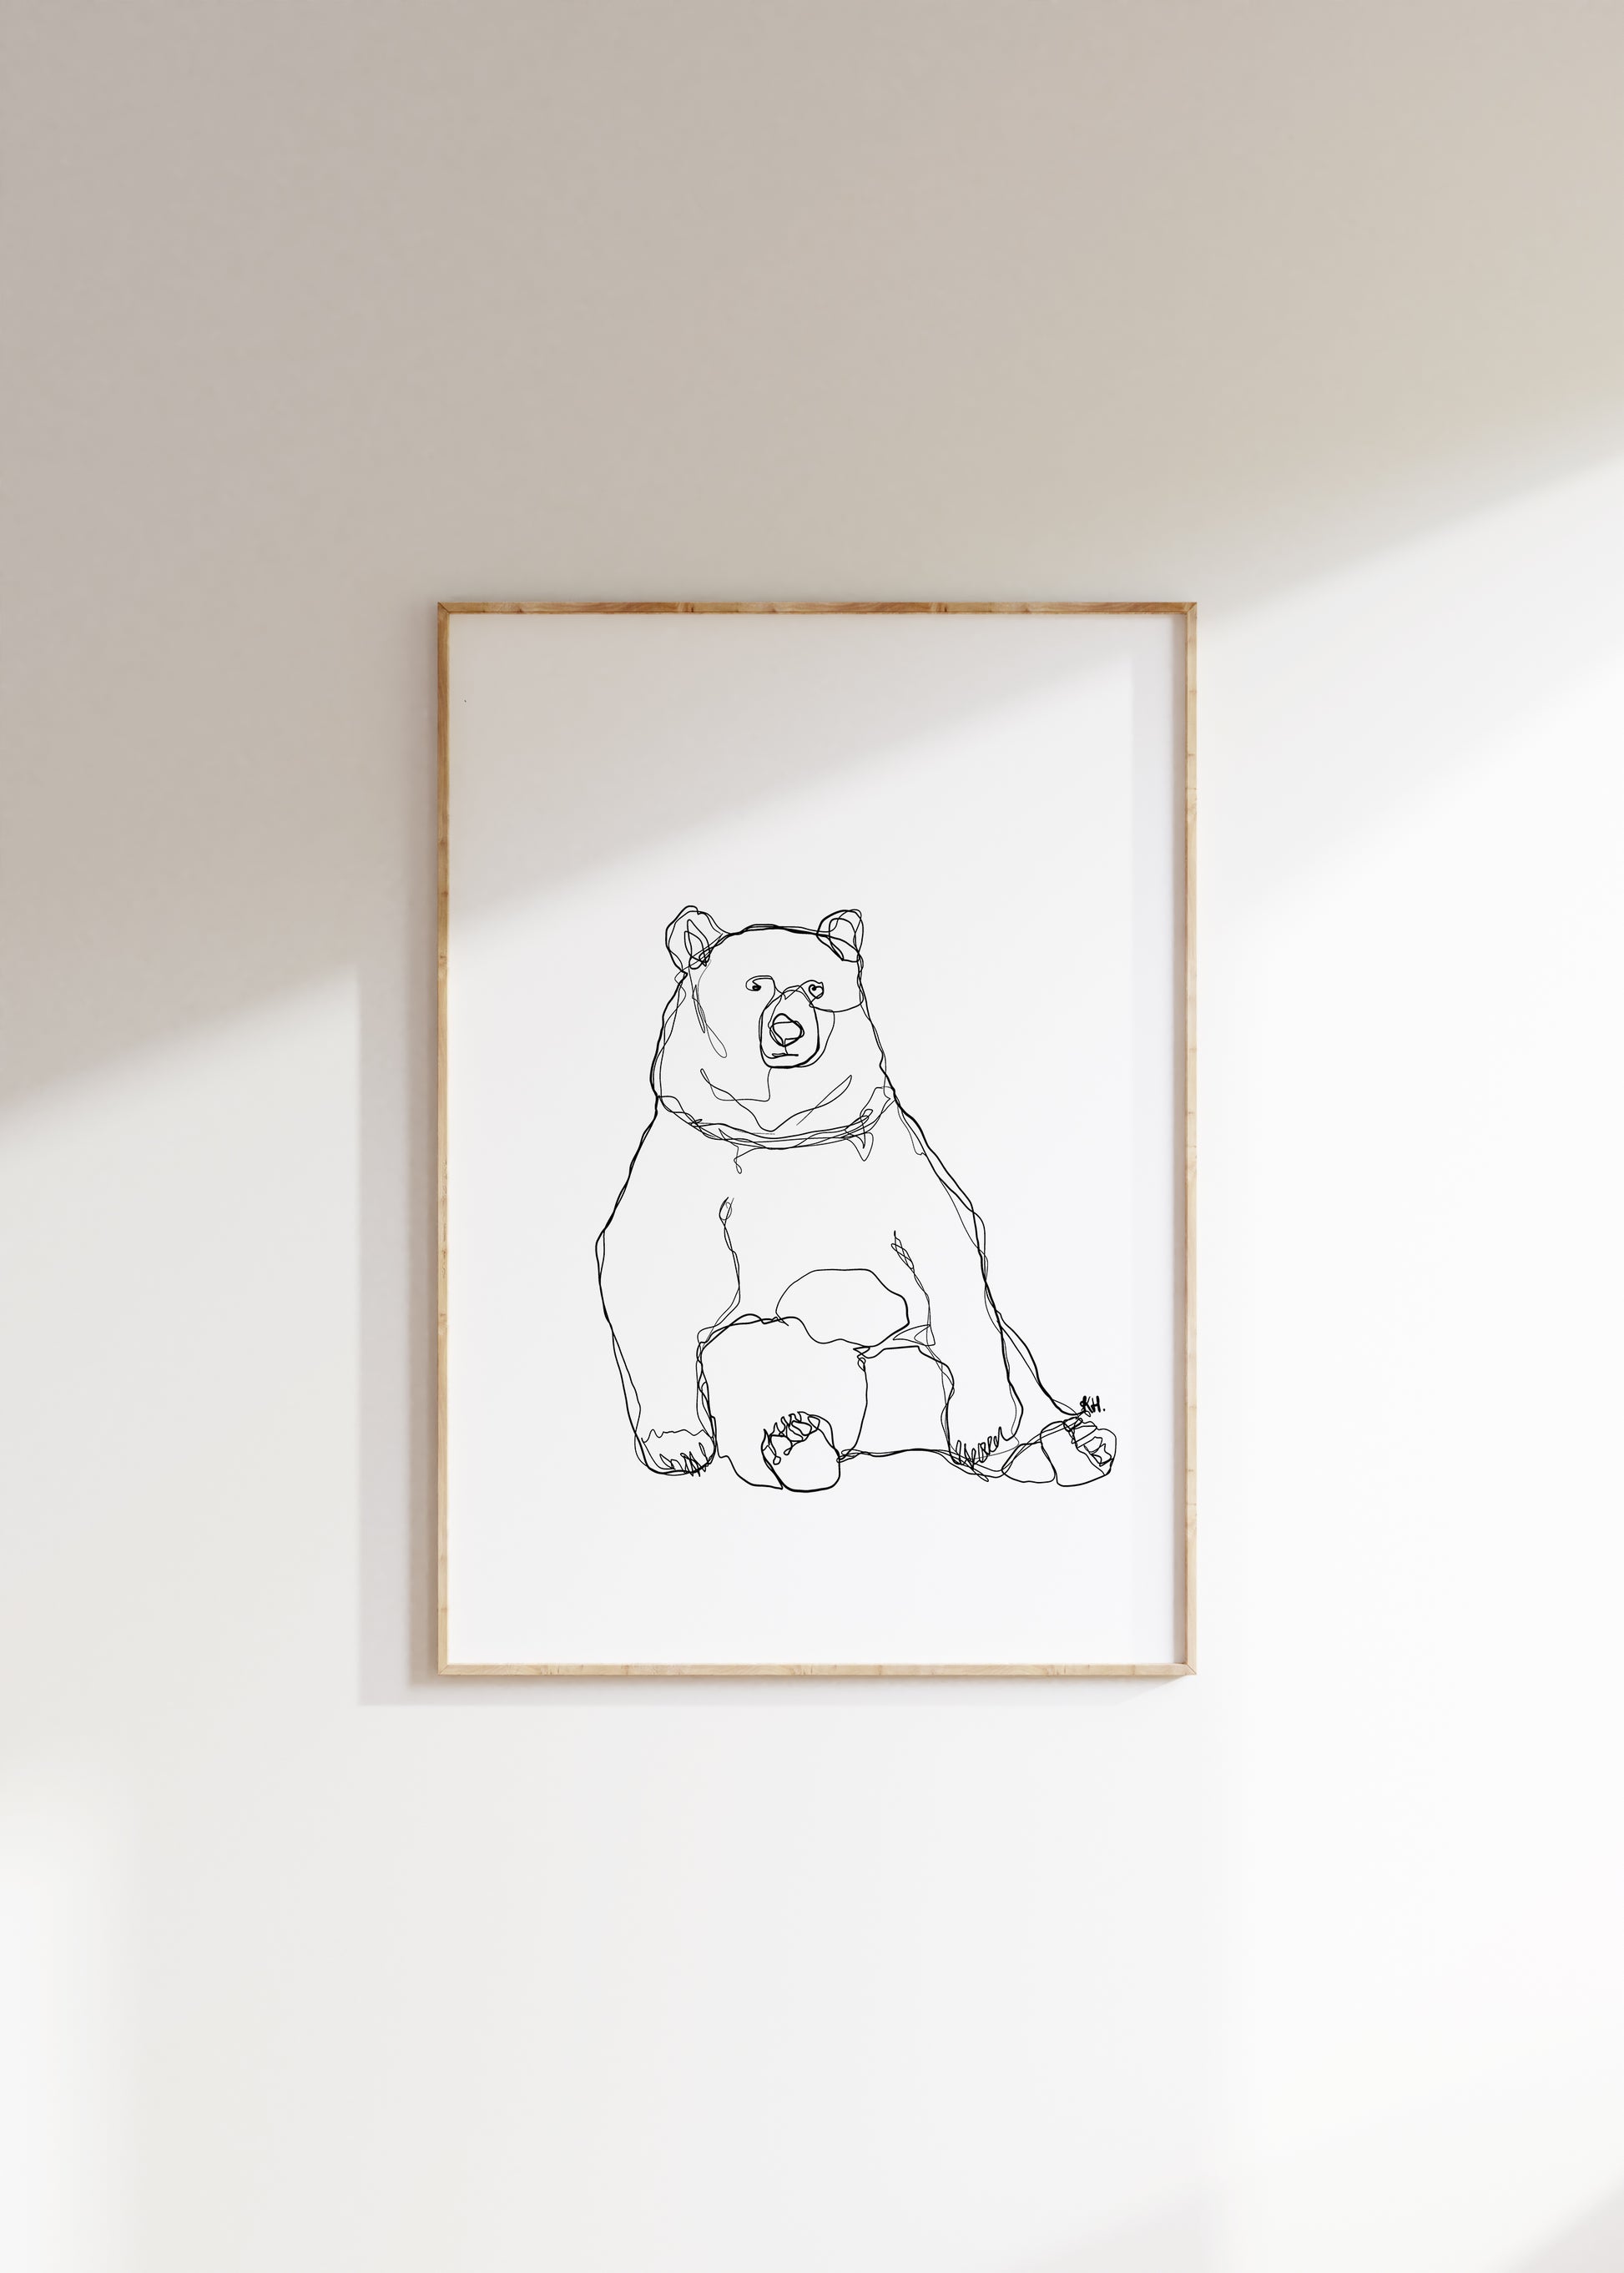 Sitting bear one line drawing, black and white art print framed in a wood frame